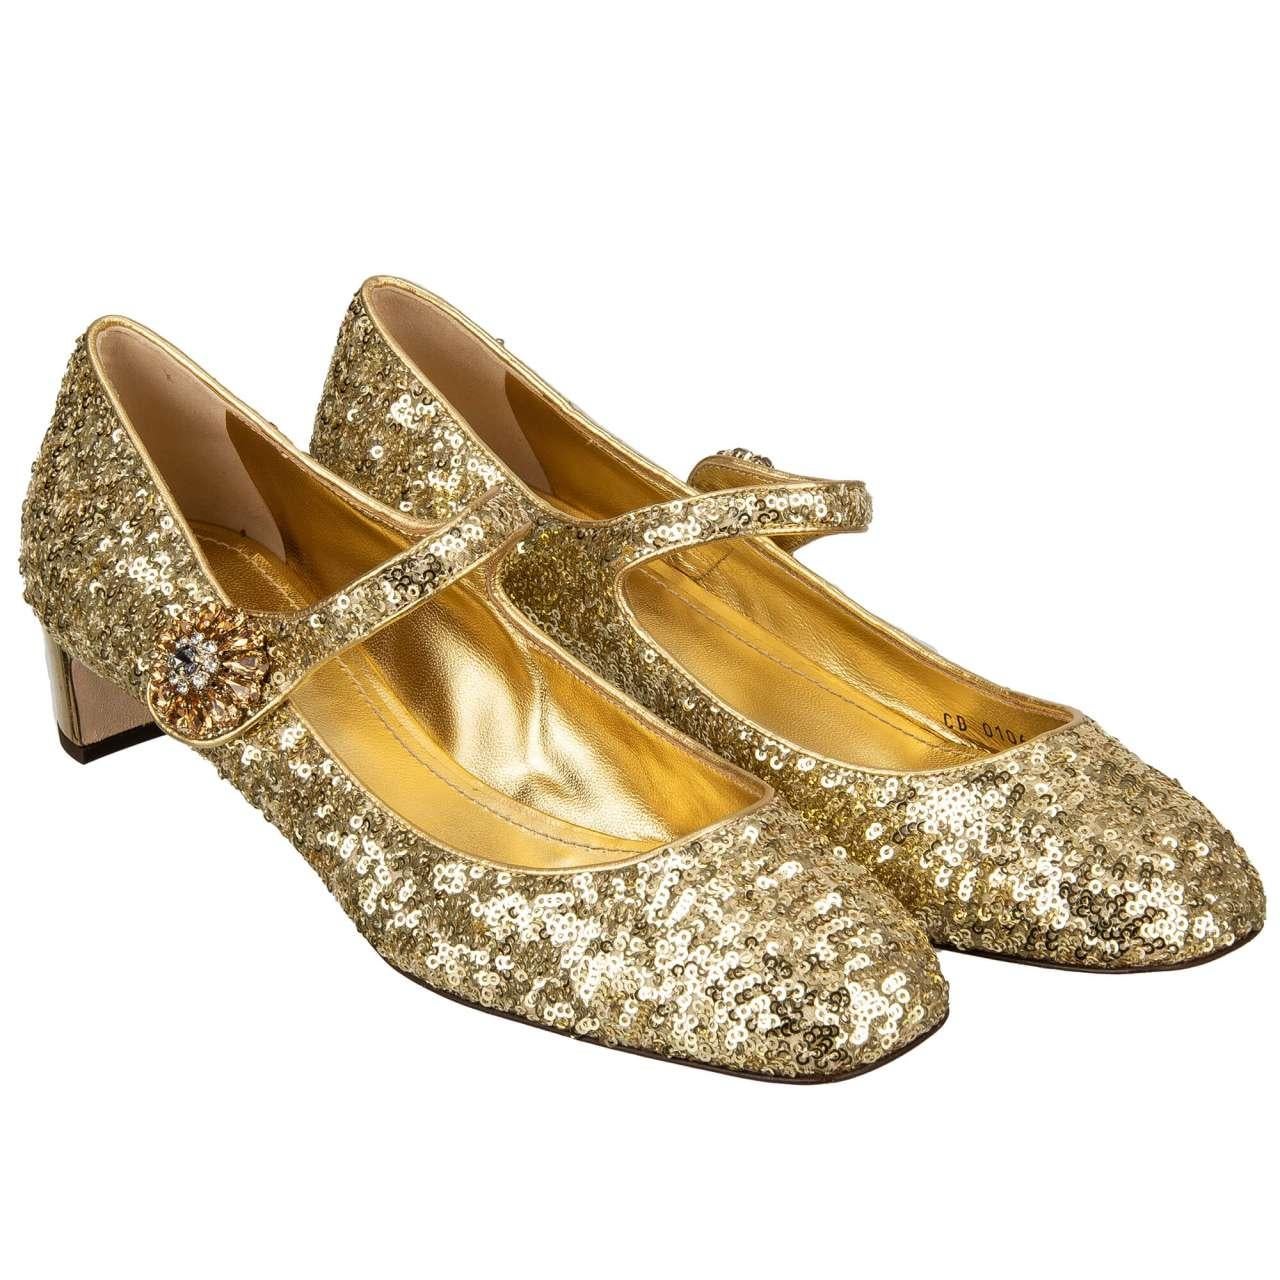 - Sequin Mary Jane Pumps VALLY in gold with crystal heels and crystal strap closure by DOLCE & GABBANA - New with Box - MADE IN ITALY - Decorative crystals - Elastic closure - Model: CD0106-AL346-80997 - Material: 80% Polyester, 20% Lambskin - Inner